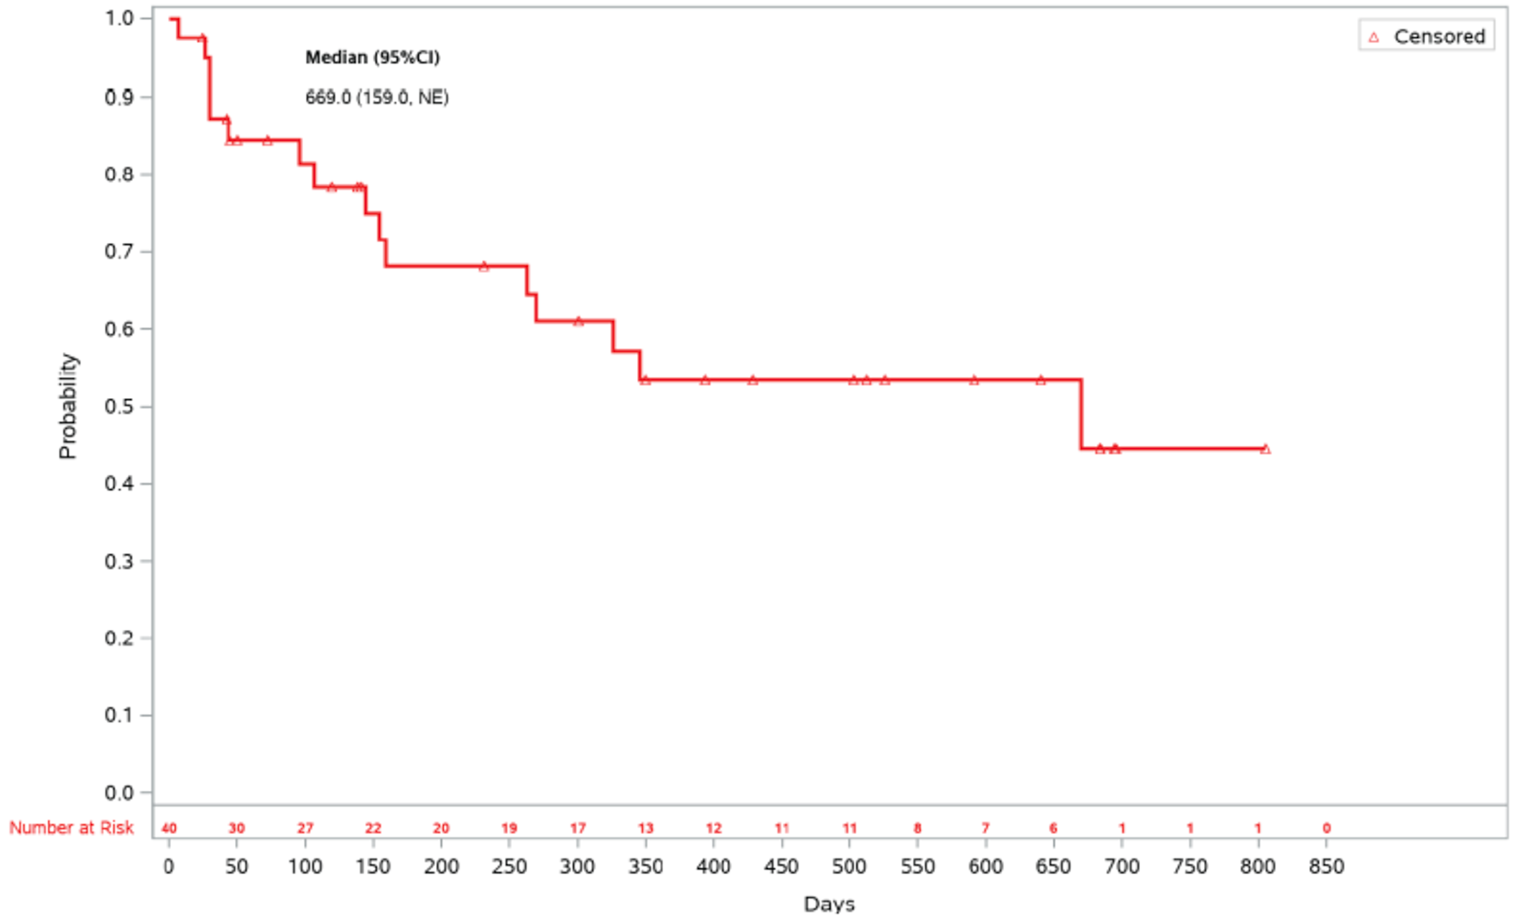 KM curve for duration of response for patients who had a response at day 28 and who received ruxolitinib is shown. The curve decreases over time. The slope is steeper in the beginning than toward the end. The curve ends at about 830 days.